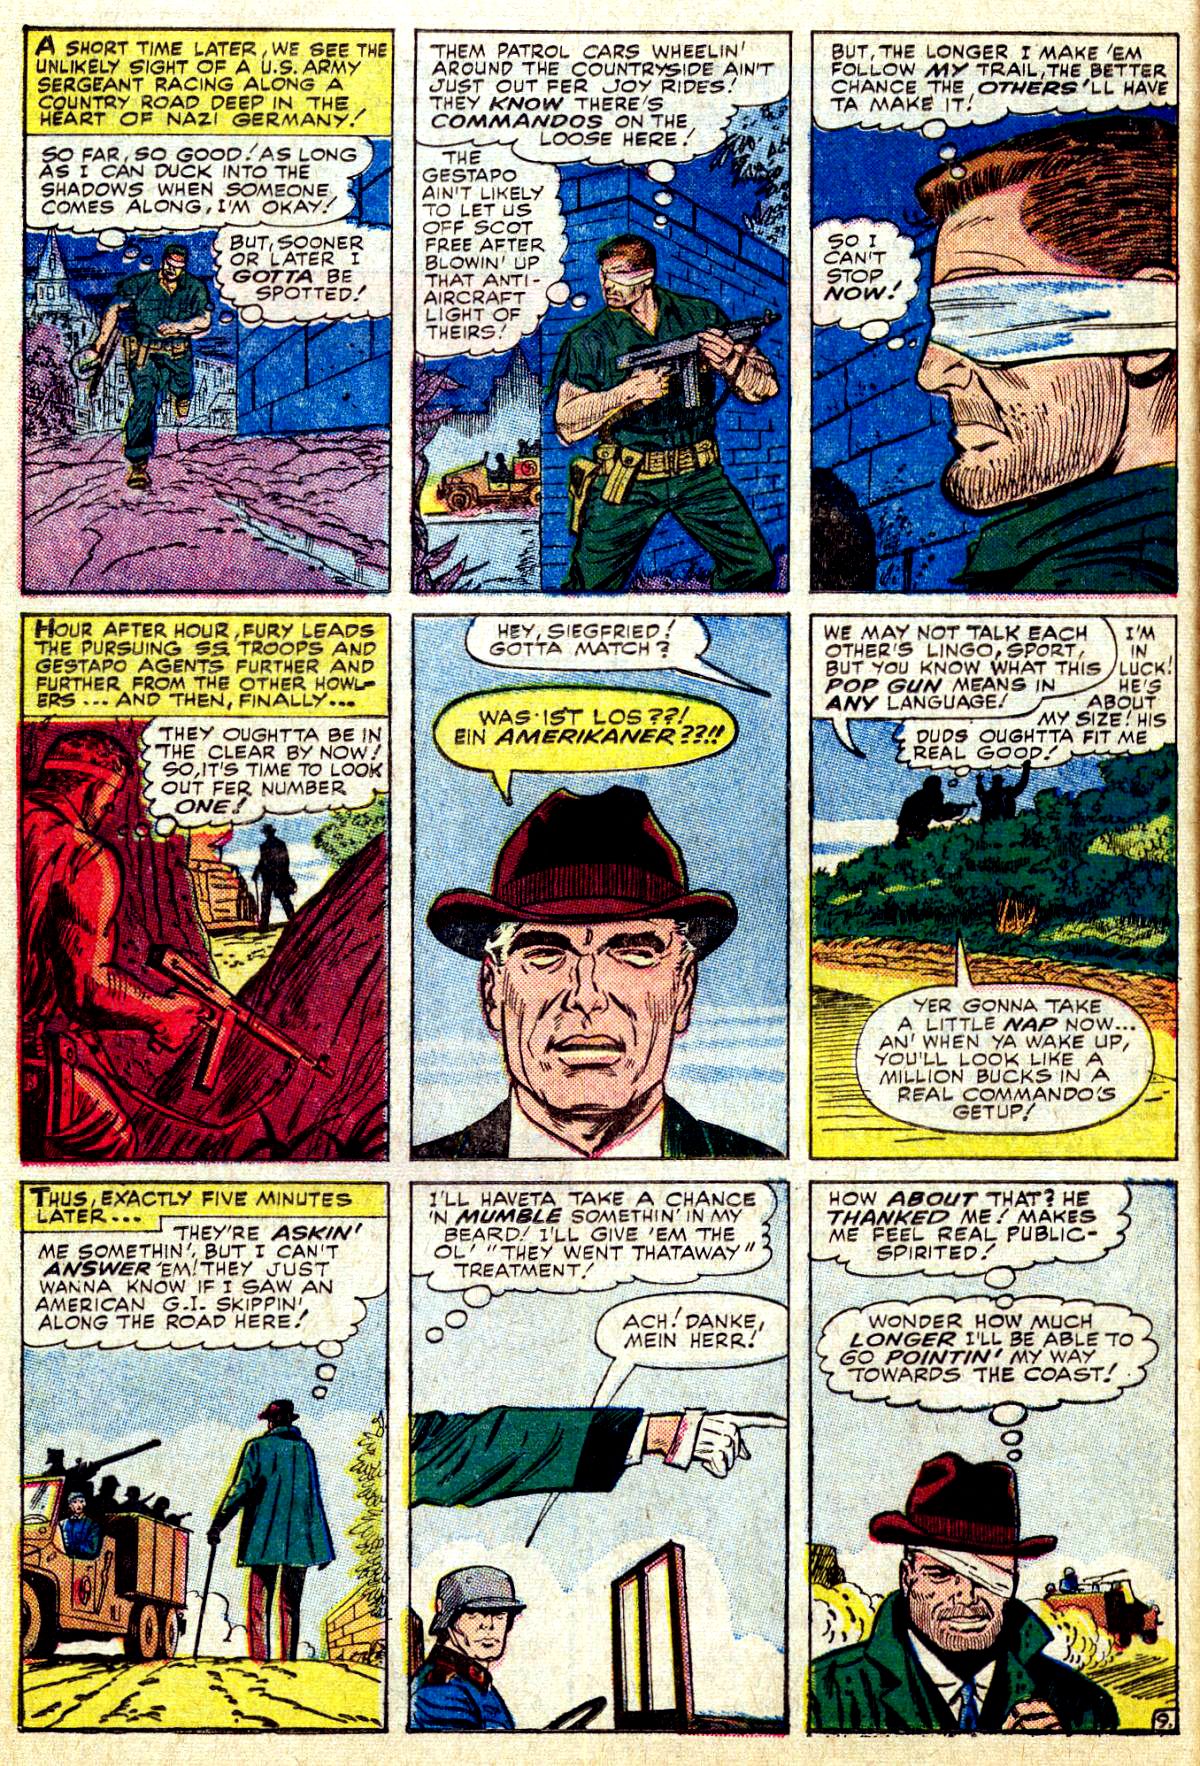 Read online Sgt. Fury comic -  Issue #27 - 14